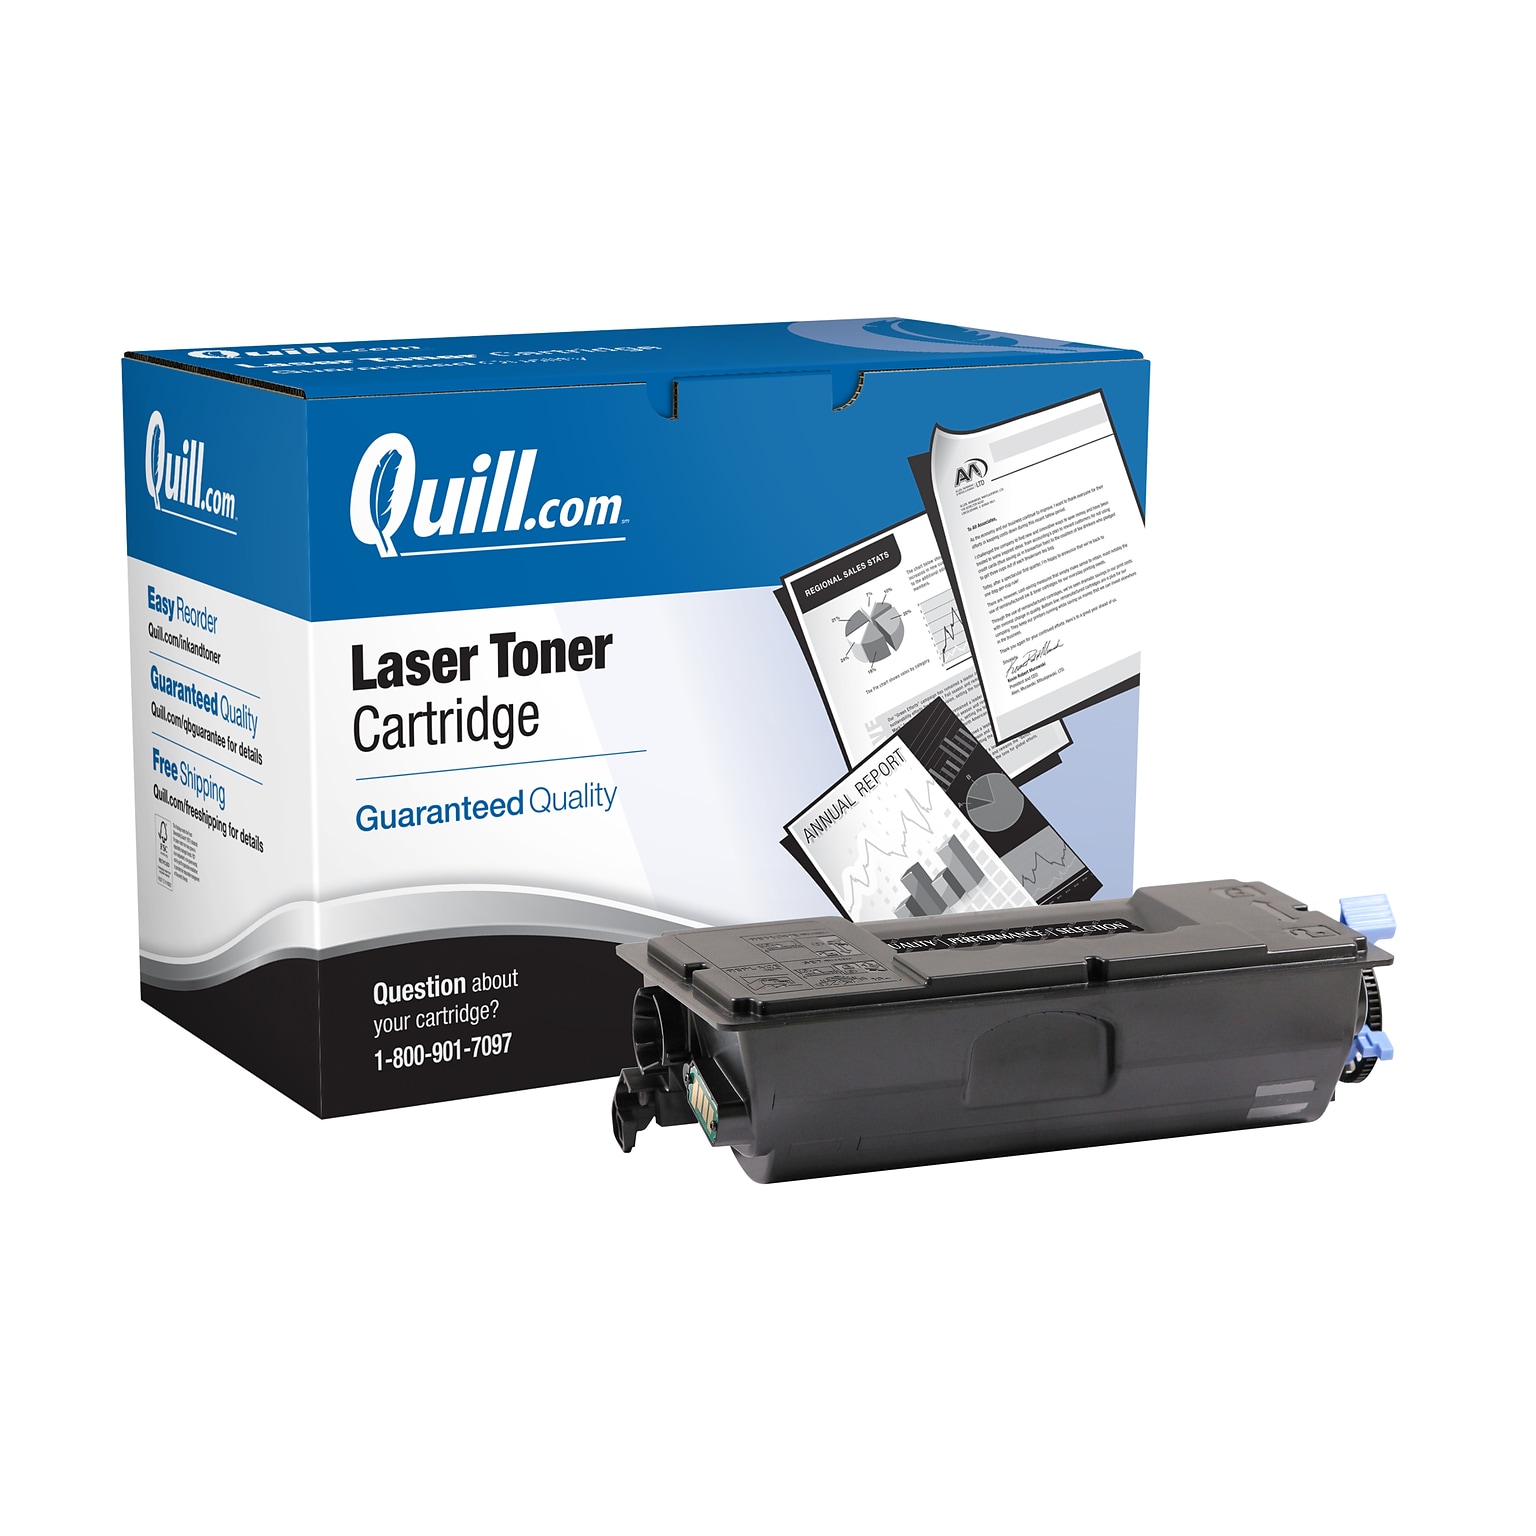 Quill Brand® Remanufactured Black Standard Yield Toner Cartridge Replacement for Kyocera TK-3102 (TK-3102) (Lifetime Warranty)